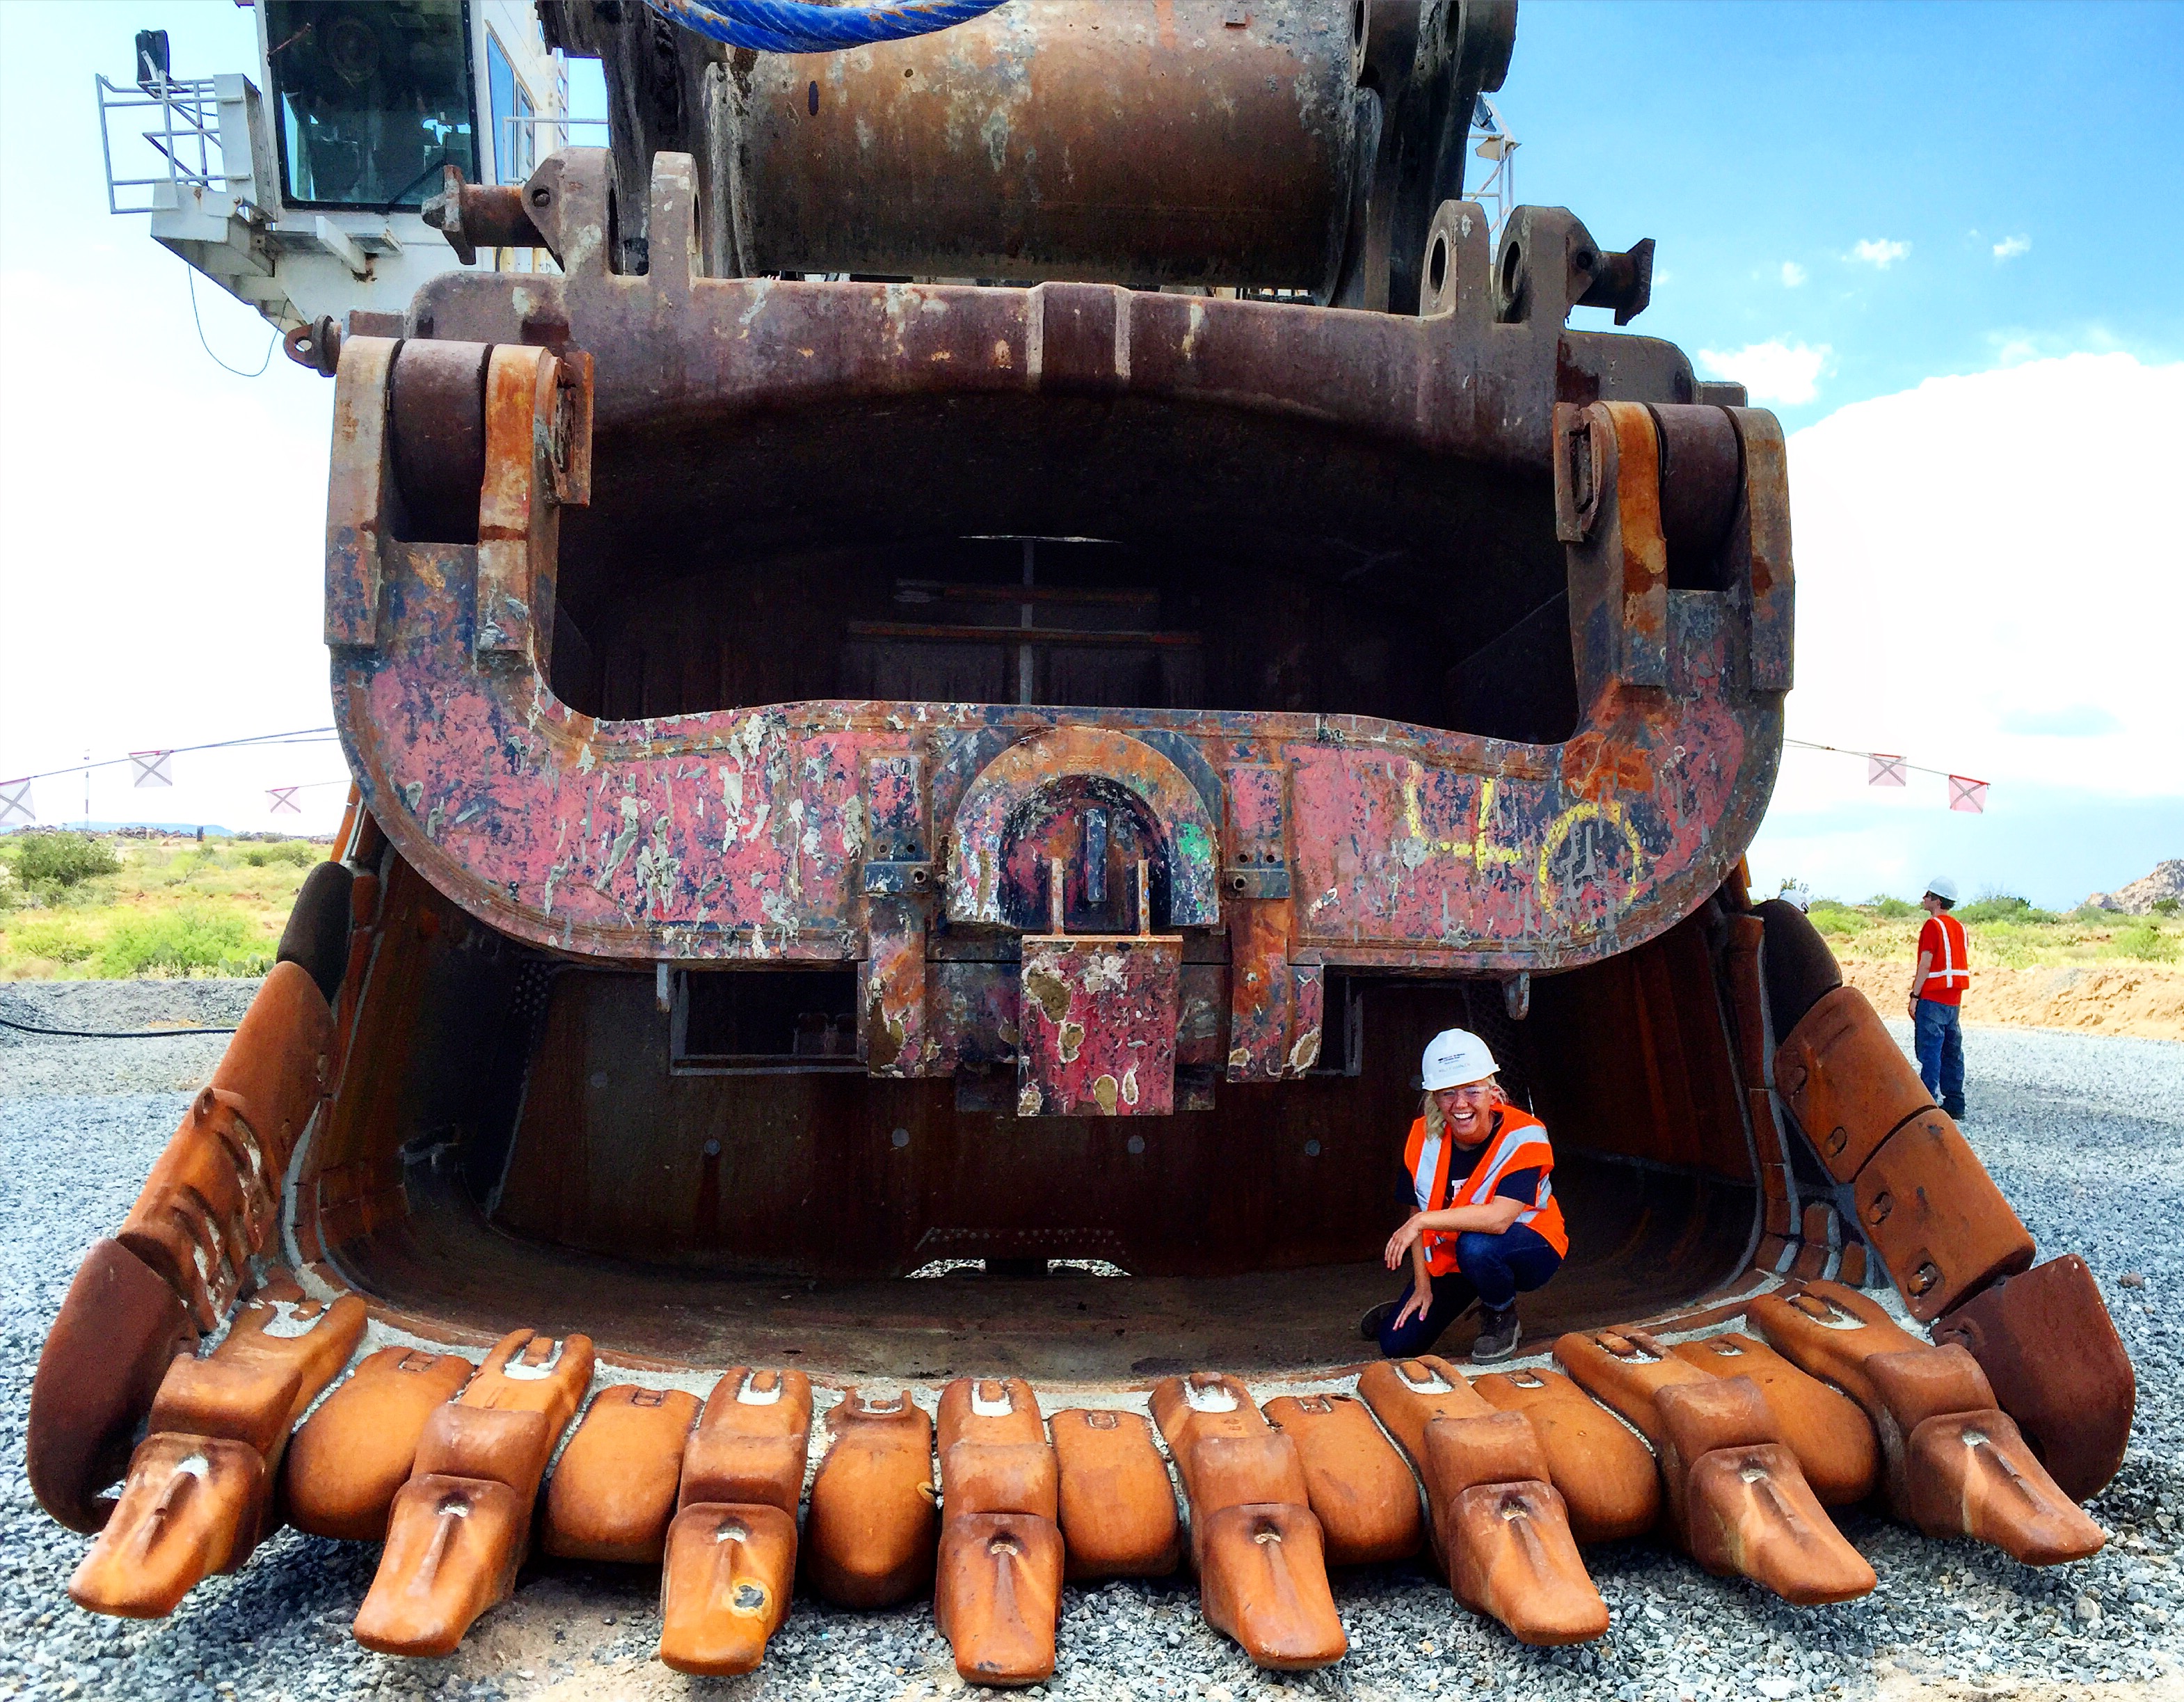 Haley Whalen crouches on a shovel used to load ore into haul trucks.